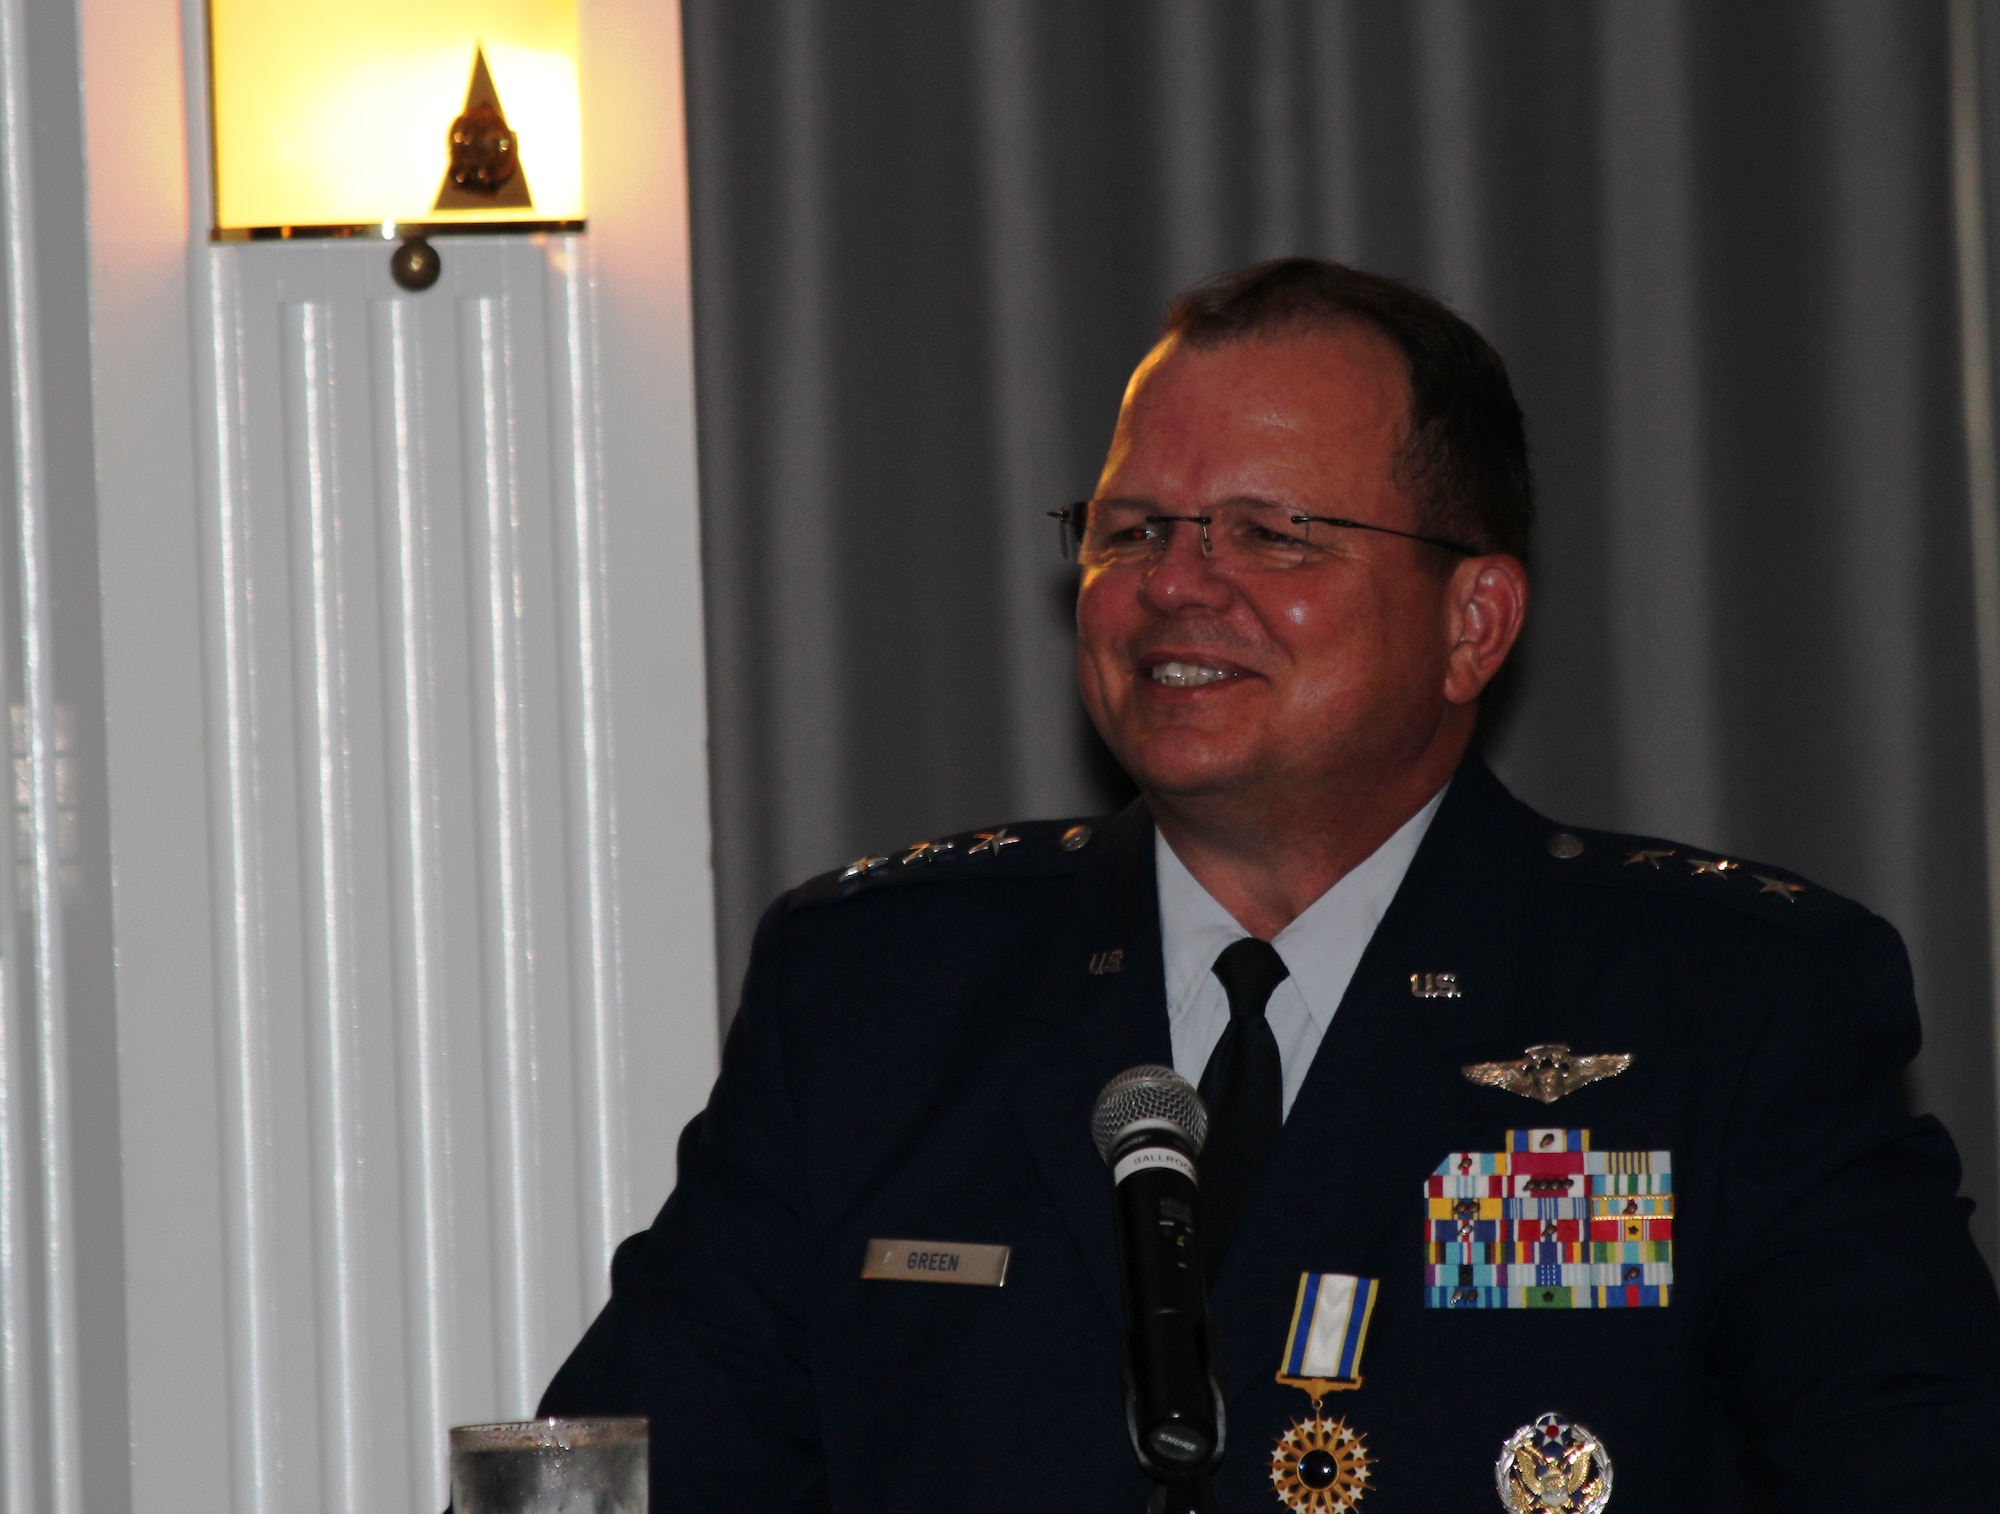 Lt. Gen. Charles B. Green, Air Force Surgeon General, speaks to a crowd at his retirement after 34 years of service during a ceremony on July 19 at the Bolling Club. (Photo by Jon Stock, U.S. Air Force)